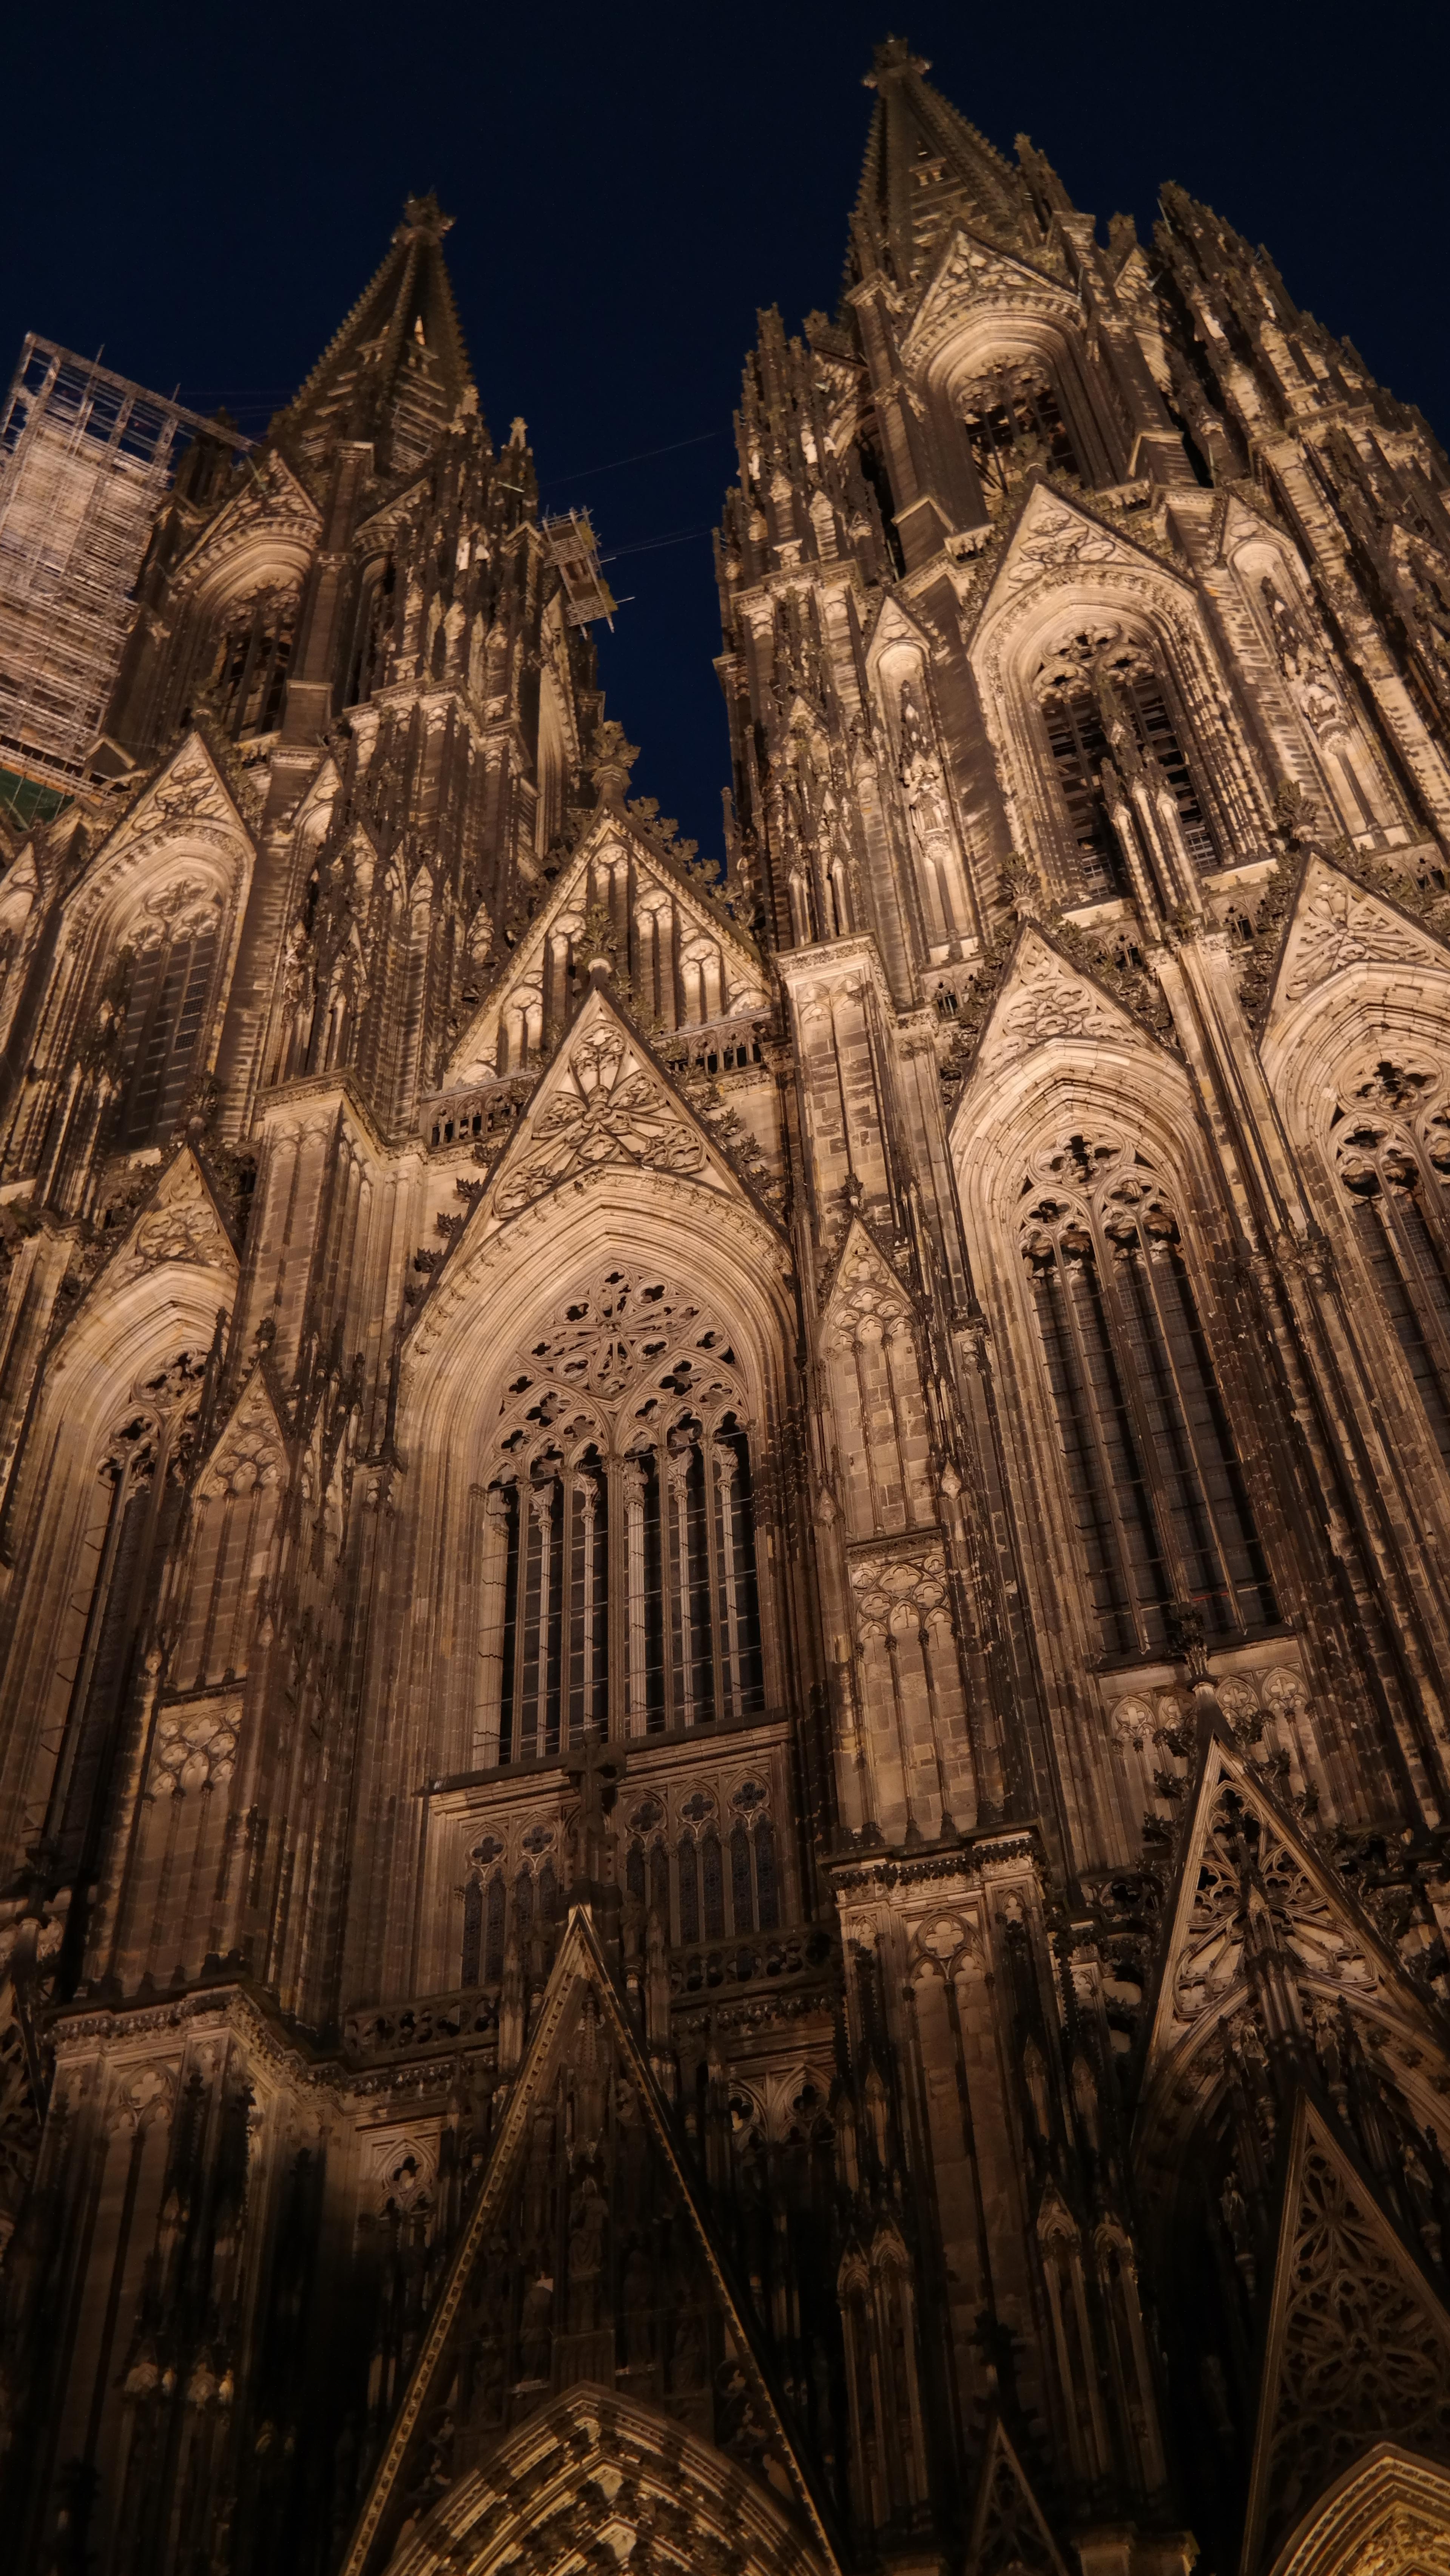 Cover image of this place Kölner Dom